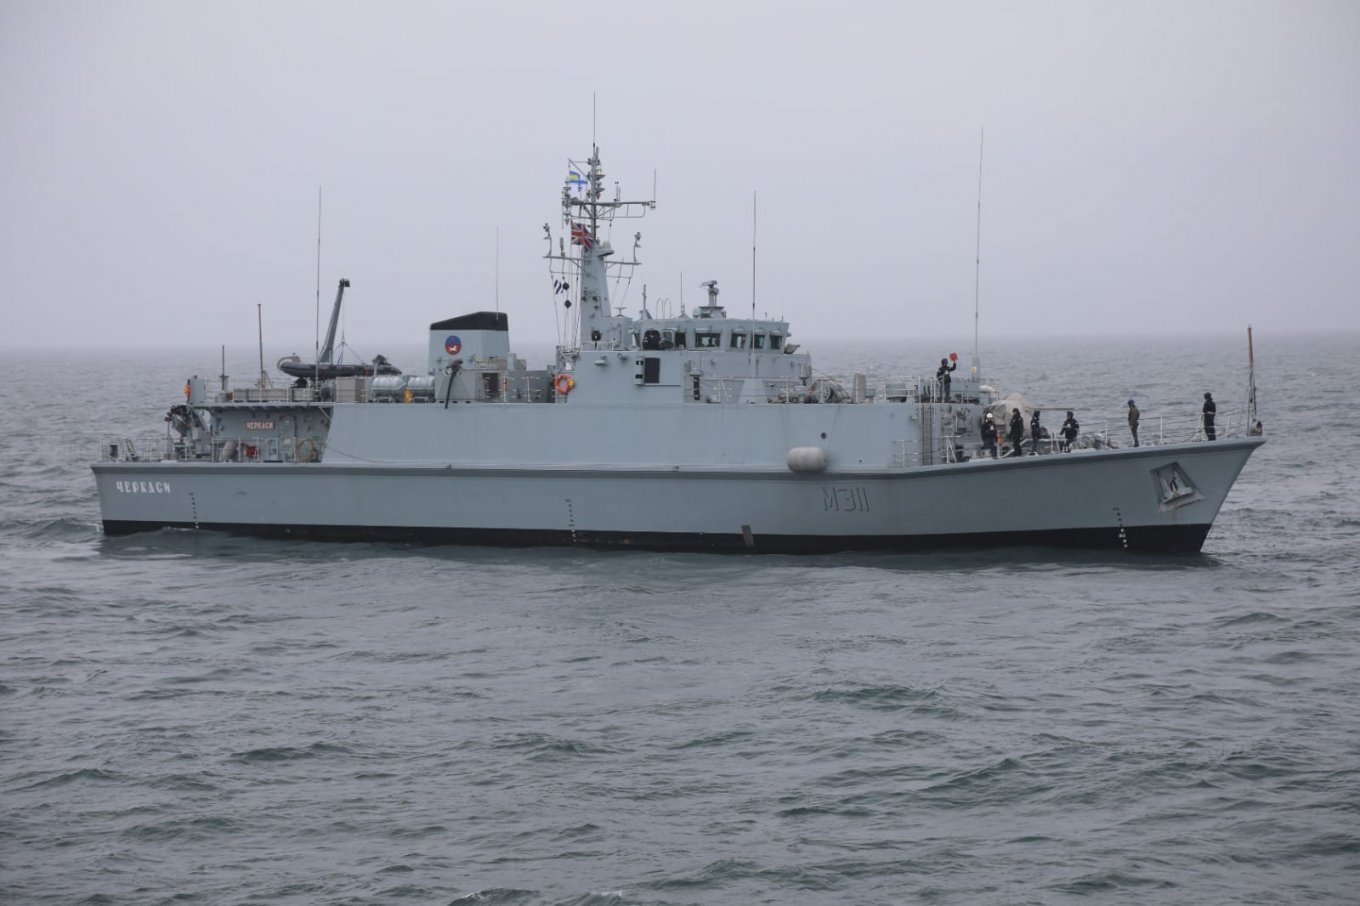 Two Ukrainian Ships Are Participating in Multinational Exercises in Great Britain, The Cherkasy mine countermeasures ship, Defense Express